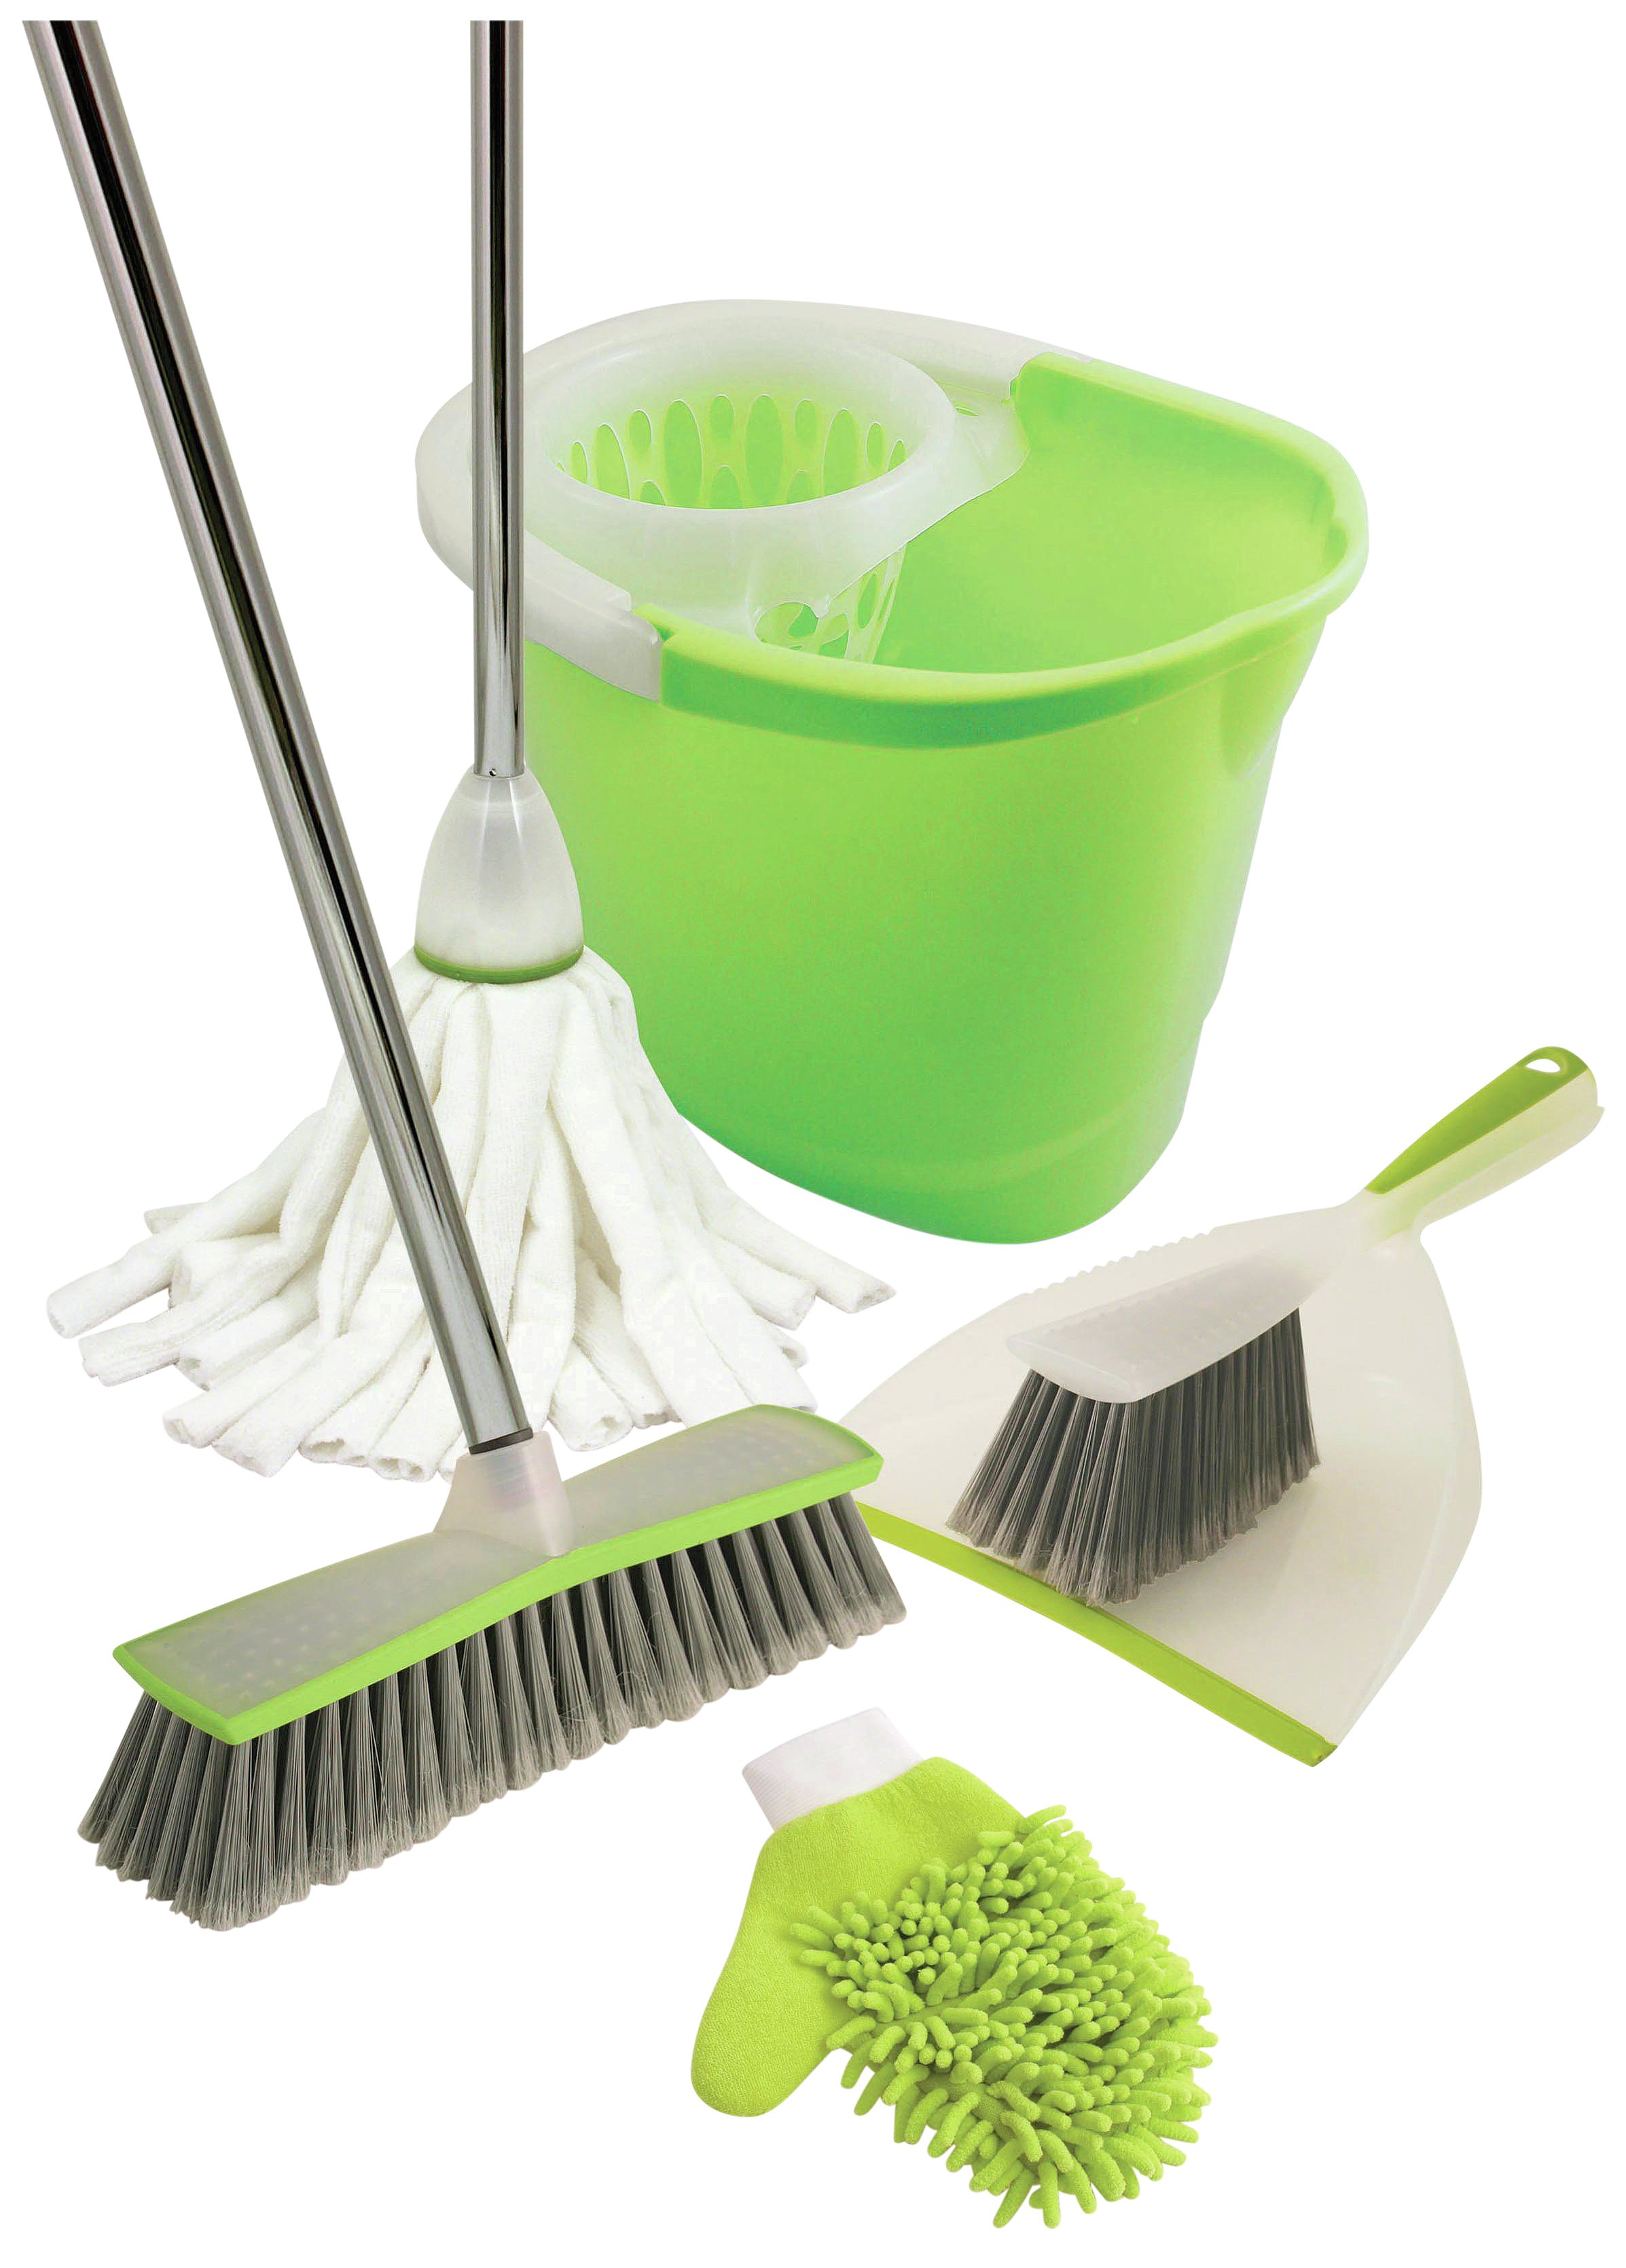 Bentley Hour Glass Set of 7 Cleaning Set